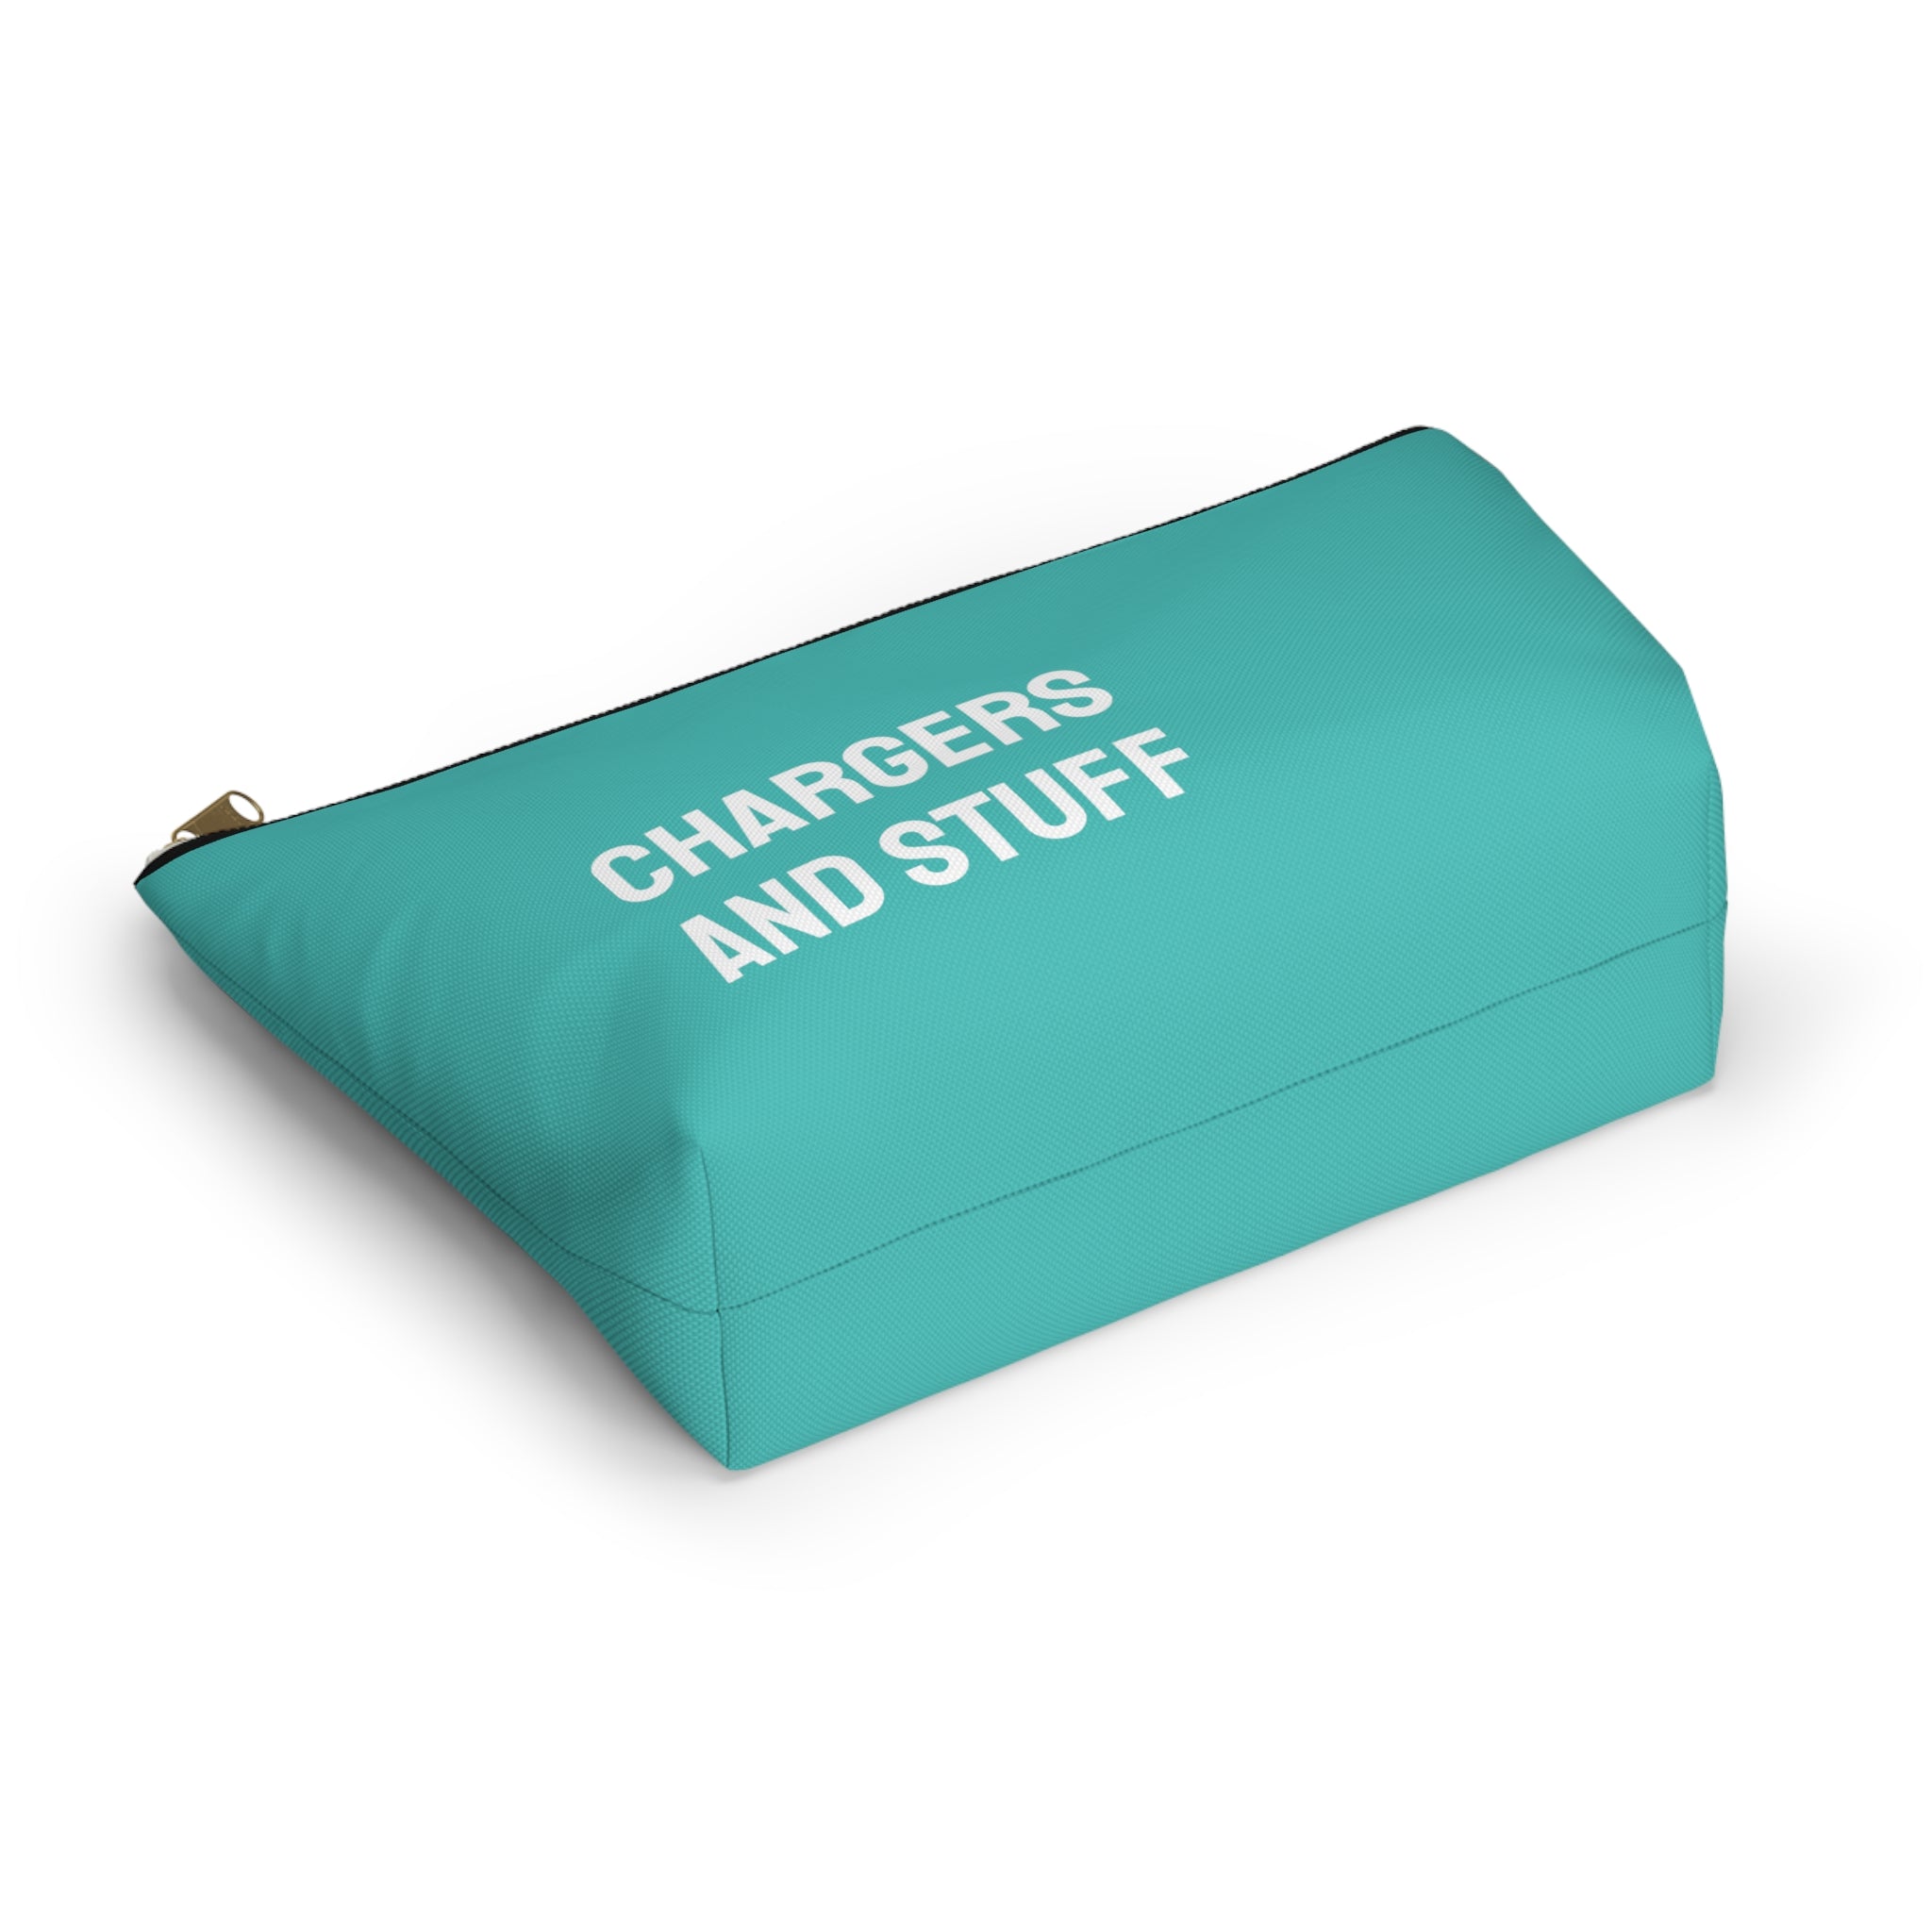 Chargers & stuff Pouch (Teal)